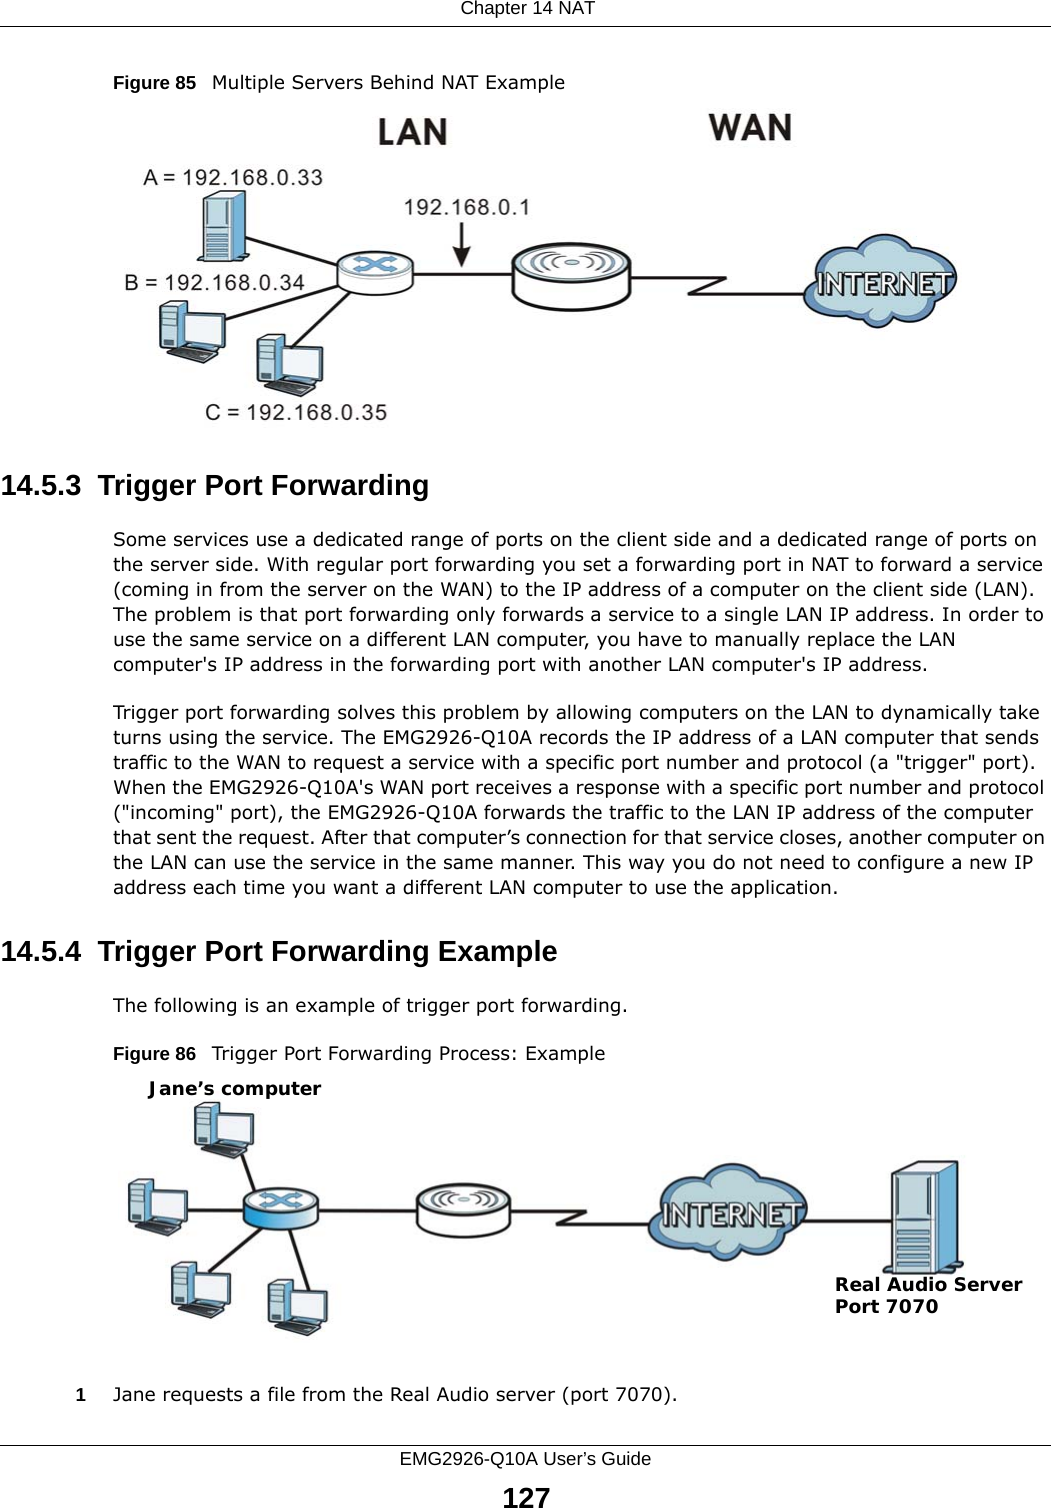  Chapter 14 NATEMG2926-Q10A User’s Guide127Figure 85   Multiple Servers Behind NAT Example14.5.3  Trigger Port Forwarding Some services use a dedicated range of ports on the client side and a dedicated range of ports on the server side. With regular port forwarding you set a forwarding port in NAT to forward a service (coming in from the server on the WAN) to the IP address of a computer on the client side (LAN). The problem is that port forwarding only forwards a service to a single LAN IP address. In order to use the same service on a different LAN computer, you have to manually replace the LAN computer&apos;s IP address in the forwarding port with another LAN computer&apos;s IP address. Trigger port forwarding solves this problem by allowing computers on the LAN to dynamically take turns using the service. The EMG2926-Q10A records the IP address of a LAN computer that sends traffic to the WAN to request a service with a specific port number and protocol (a &quot;trigger&quot; port). When the EMG2926-Q10A&apos;s WAN port receives a response with a specific port number and protocol (&quot;incoming&quot; port), the EMG2926-Q10A forwards the traffic to the LAN IP address of the computer that sent the request. After that computer’s connection for that service closes, another computer on the LAN can use the service in the same manner. This way you do not need to configure a new IP address each time you want a different LAN computer to use the application.14.5.4  Trigger Port Forwarding Example The following is an example of trigger port forwarding.Figure 86   Trigger Port Forwarding Process: Example1Jane requests a file from the Real Audio server (port 7070).Jane’s computerReal Audio ServerPort 7070